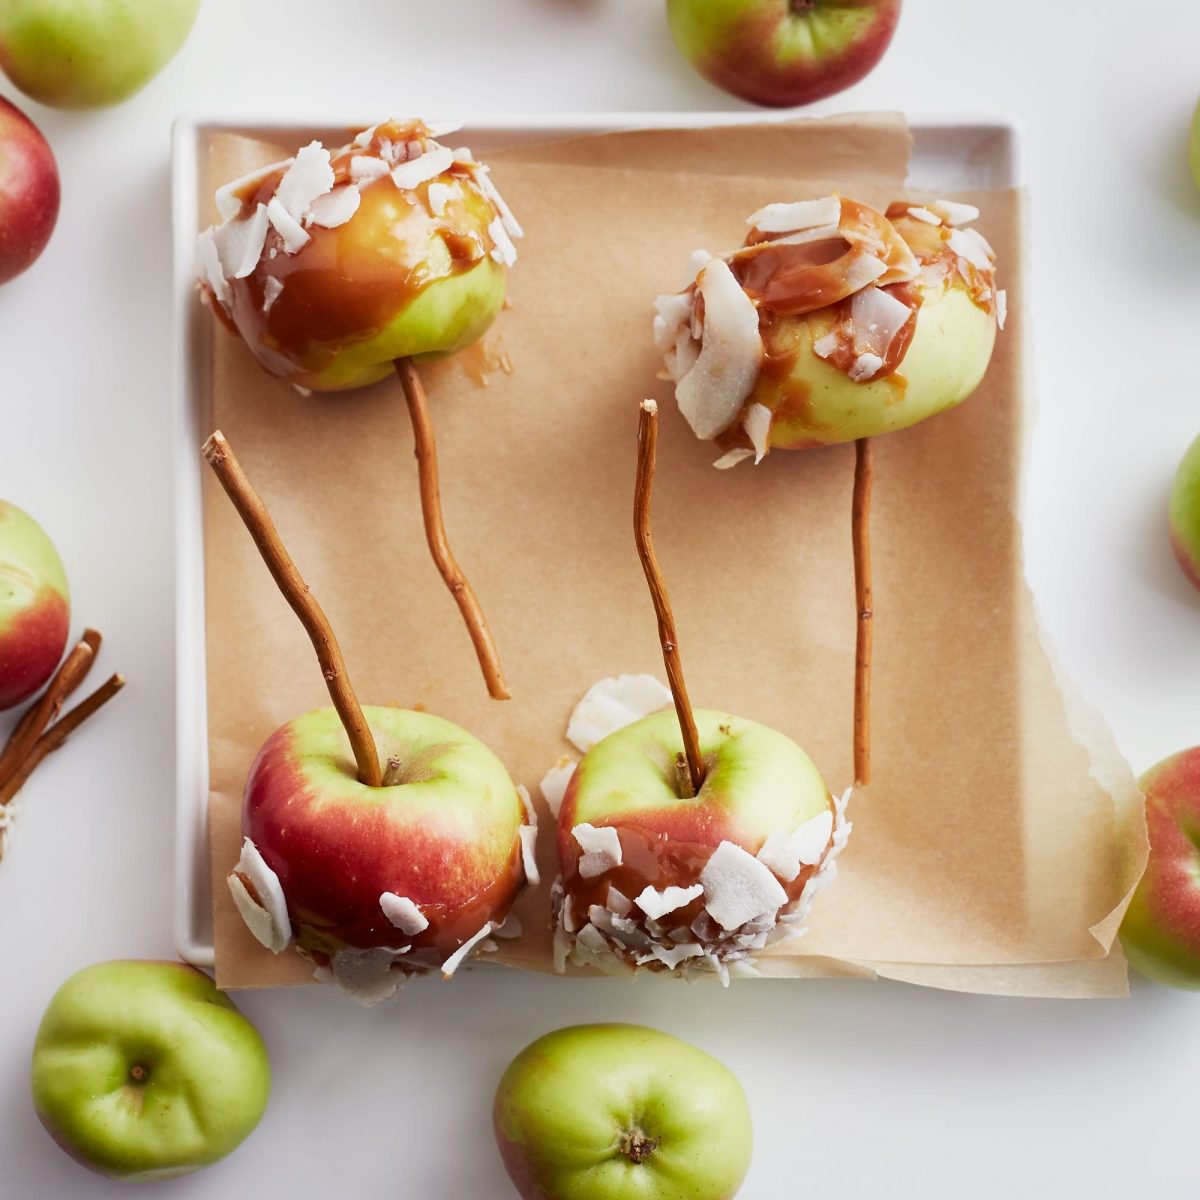 Darcy Miller Designs Caramel Apples to Go, Paper Craft, Healthy Snacks, Apple Craft, Crab Apples, Downloadable Template